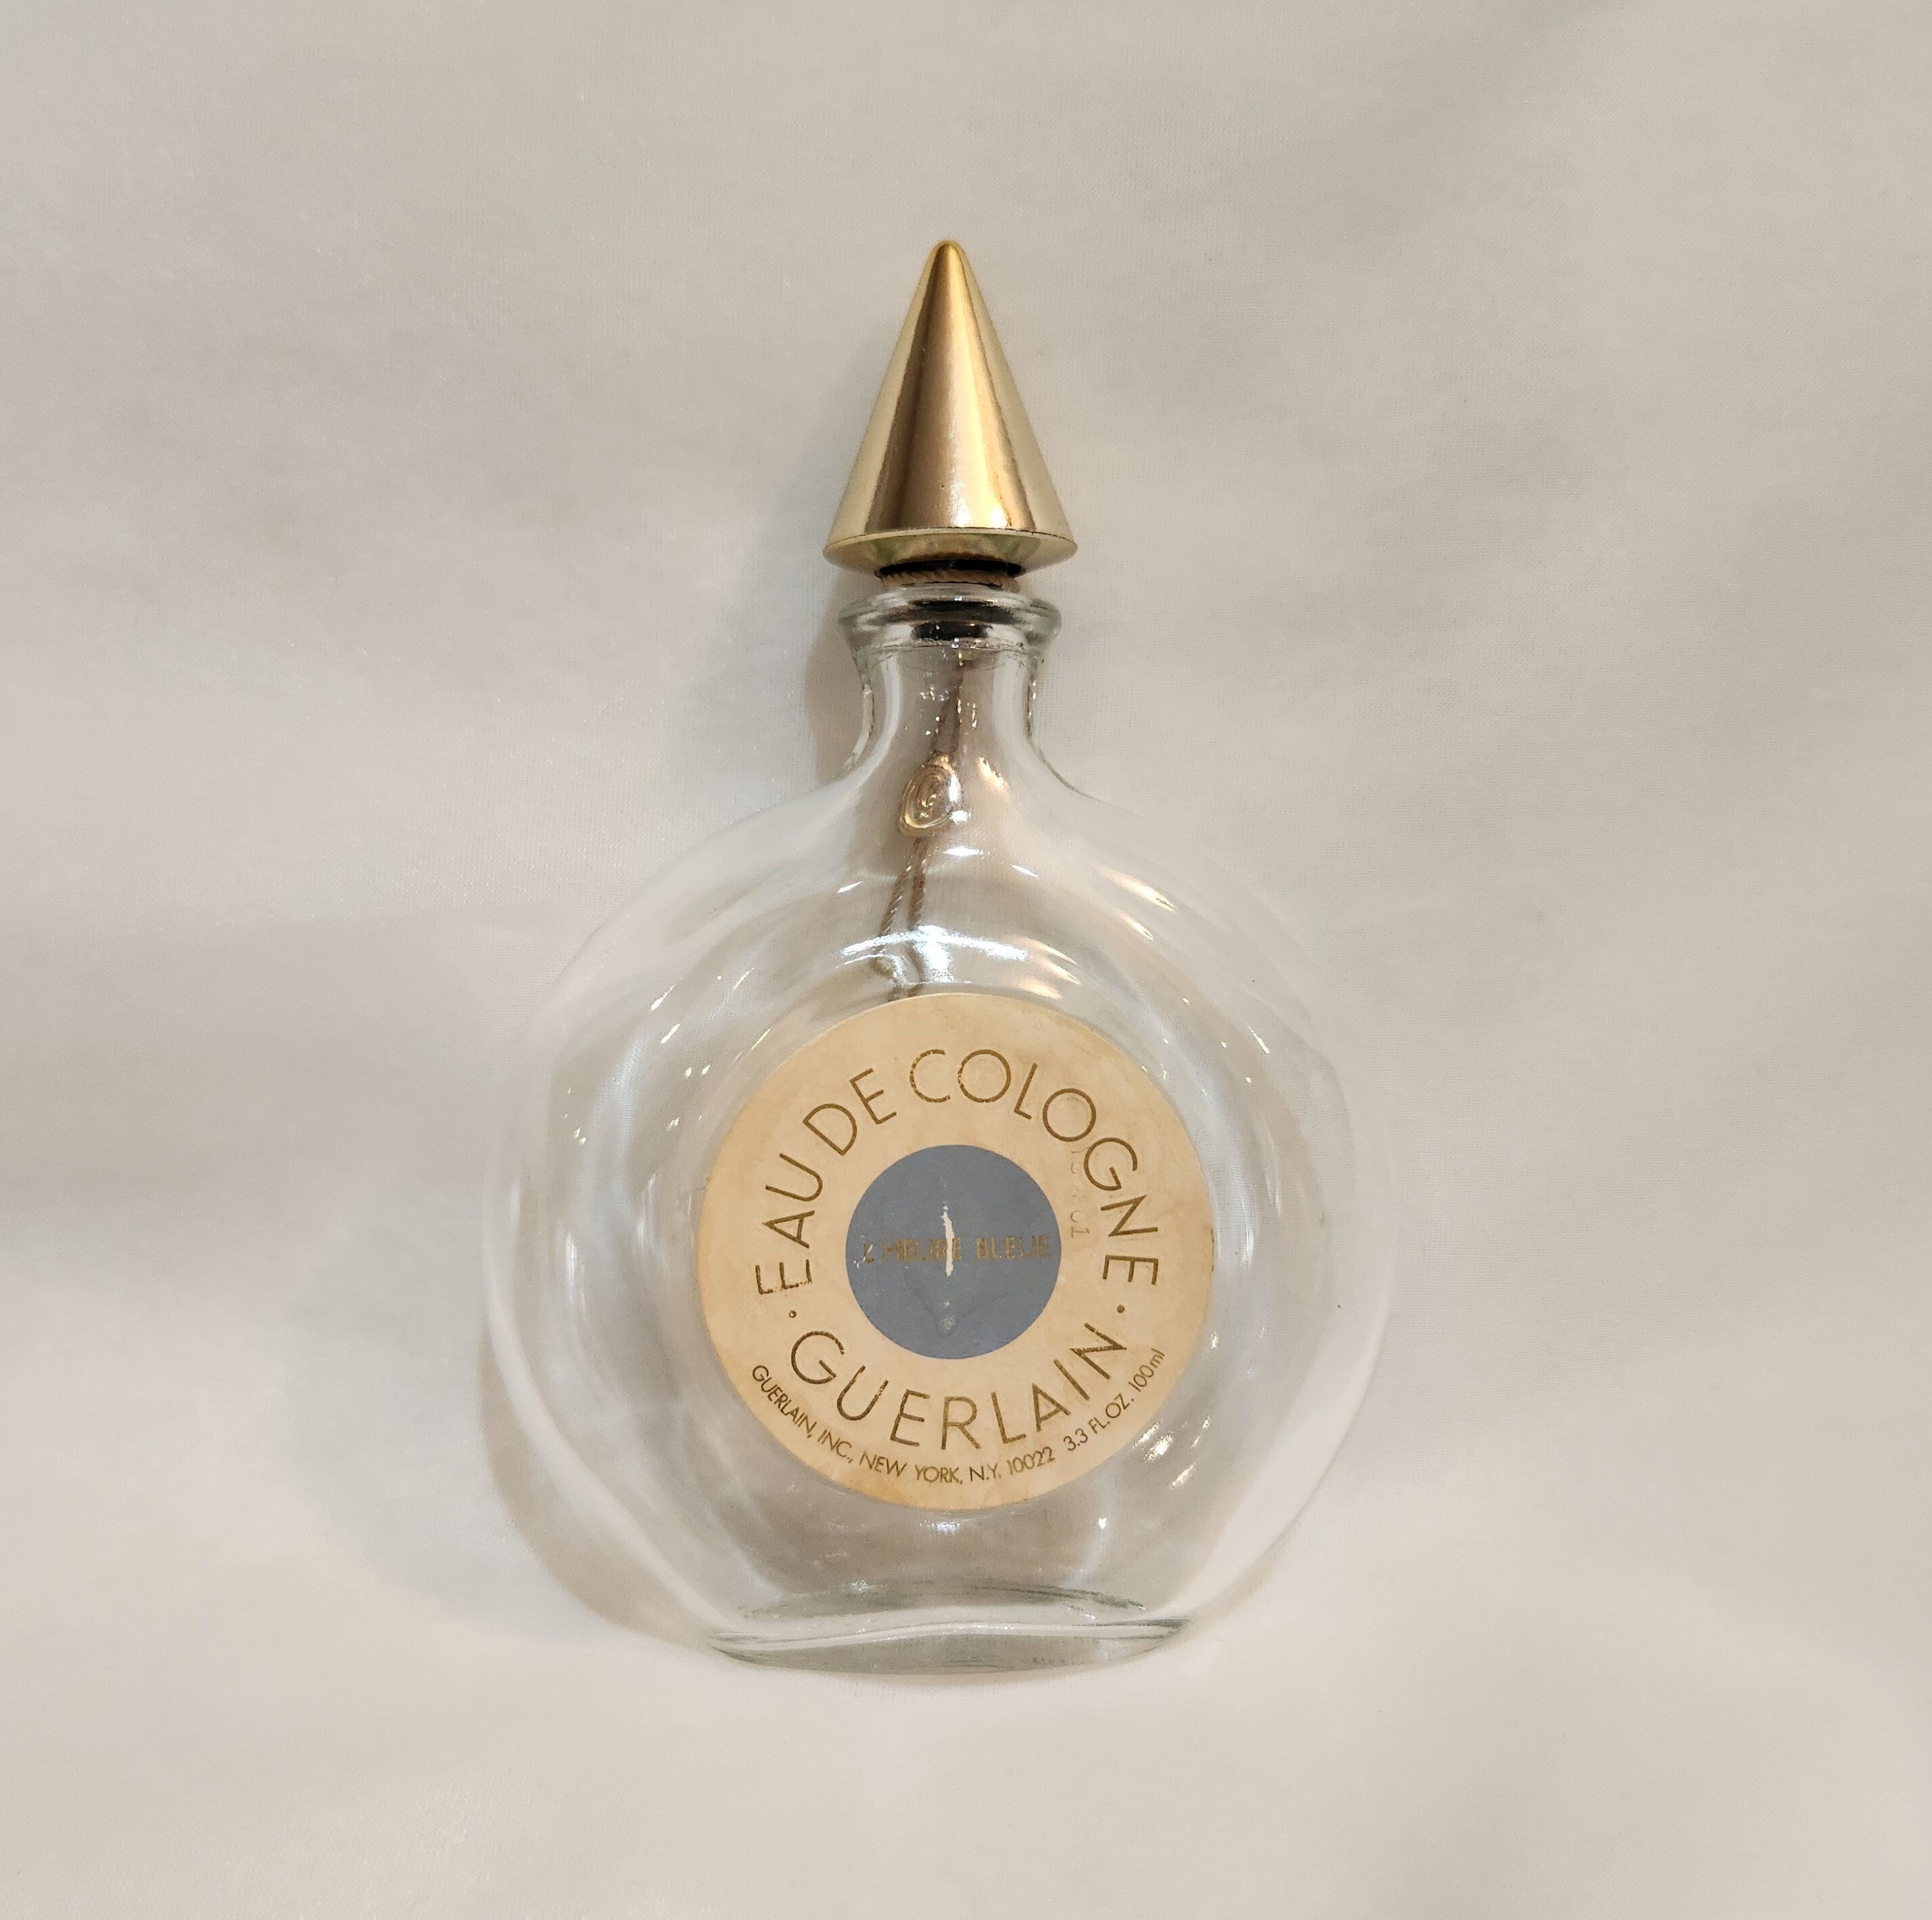 Reserved for AW .. Guerlain L'heure Bleue 'the Blue 